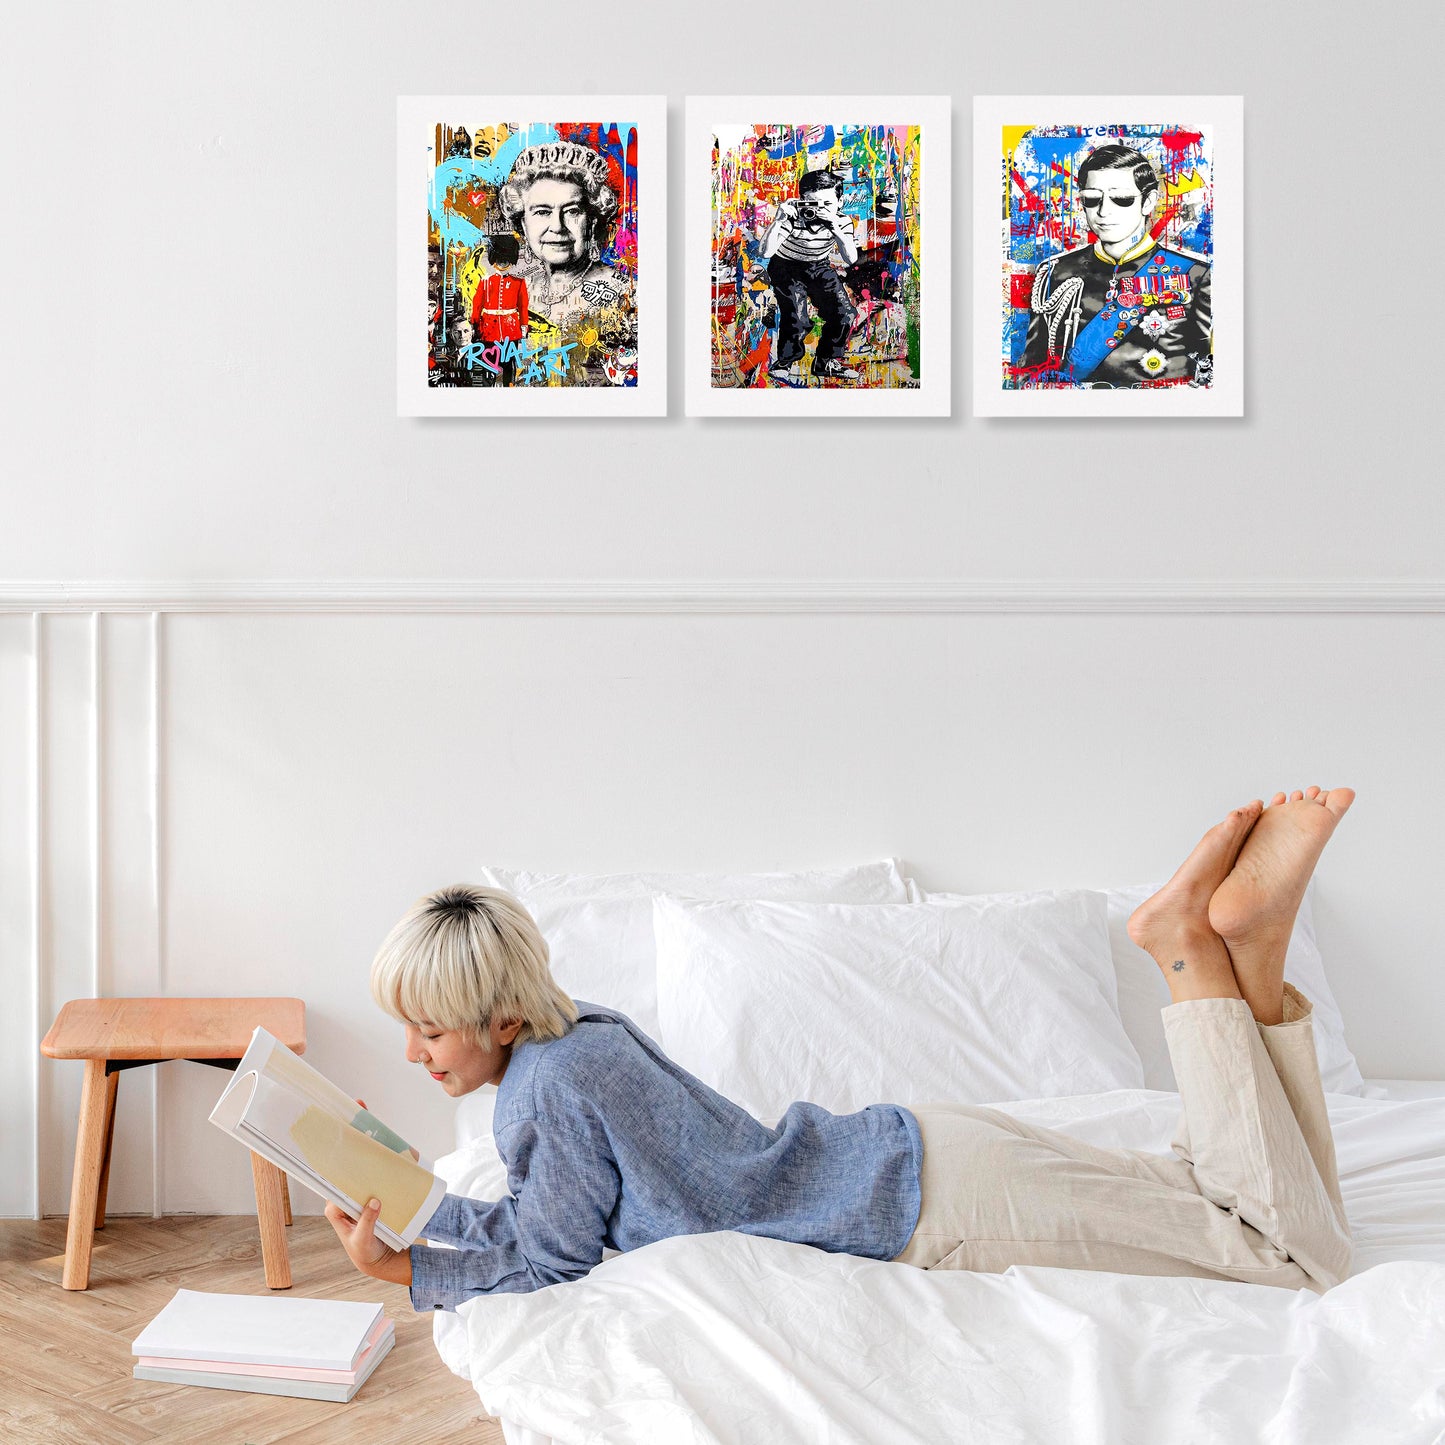 This Banksy Pop Art Smile Poster adds instant style to any room. It's designed to be long-lasting and fade-resistant, making it perfect for living rooms, bedrooms, bathrooms, offices, and more. The unique wall decoration also makes a great gift for any occasion.